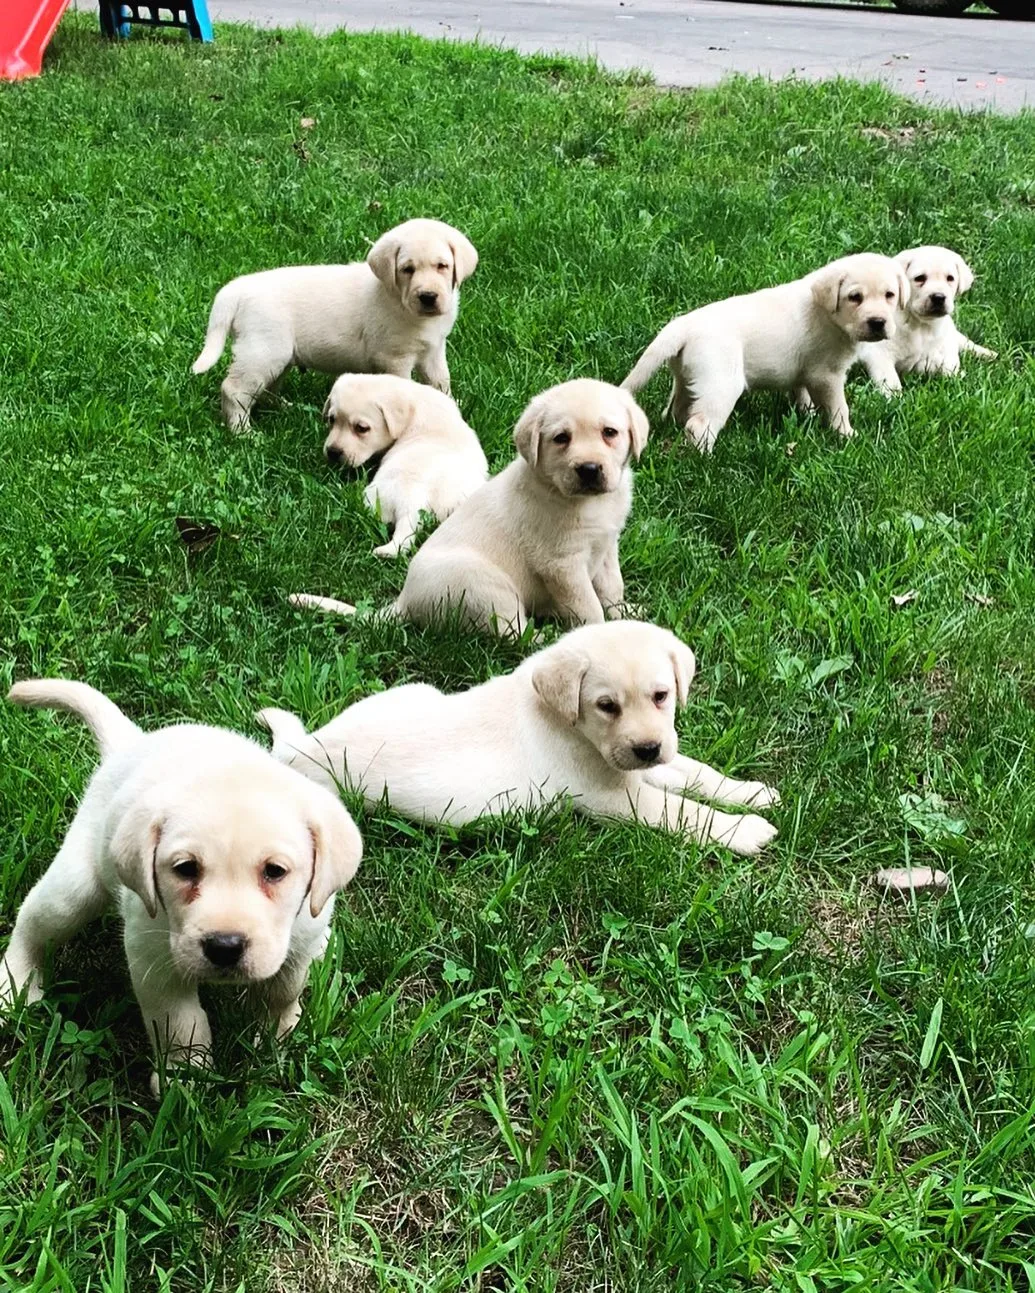 English Labrador puppies sitting in a field